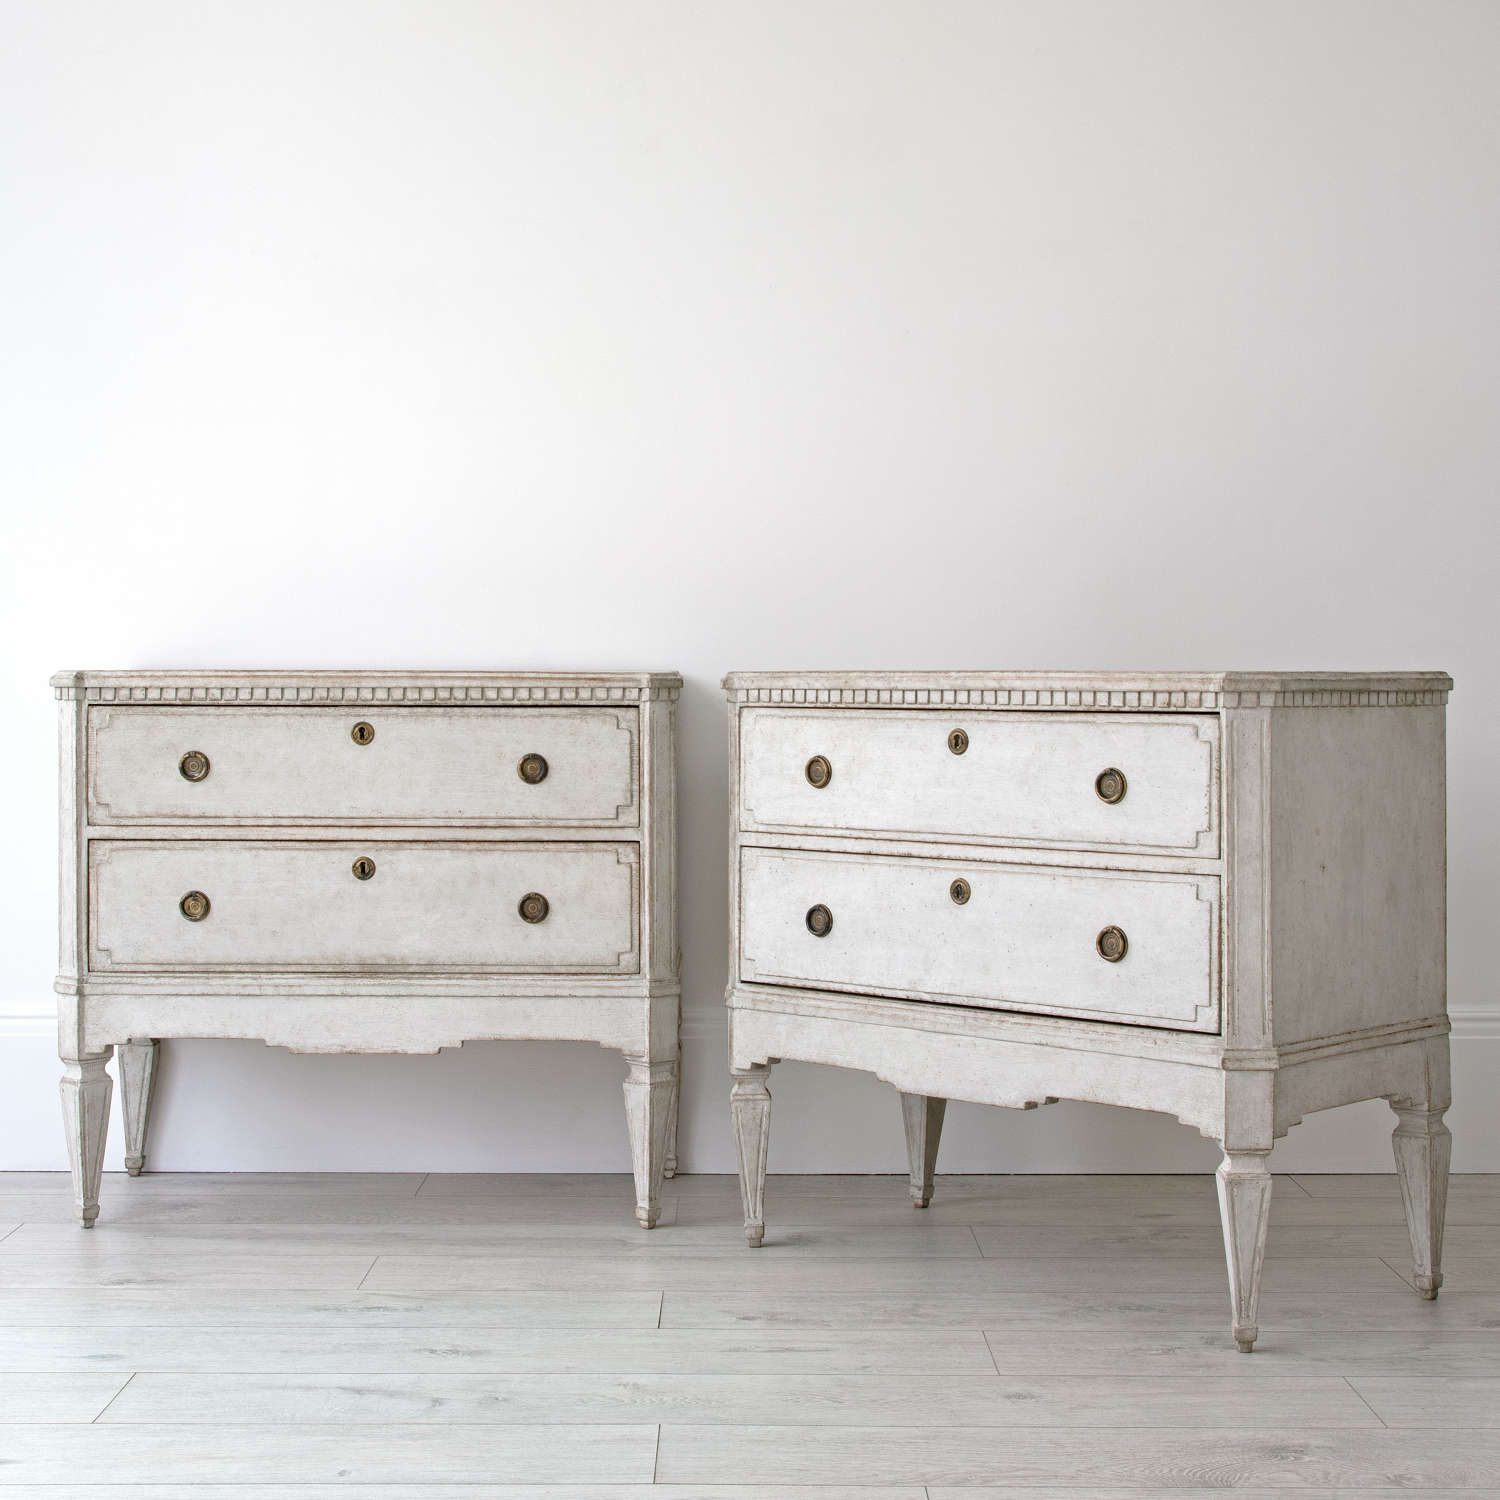 PAIR OF GUSTAVIAN STYLE CHESTS